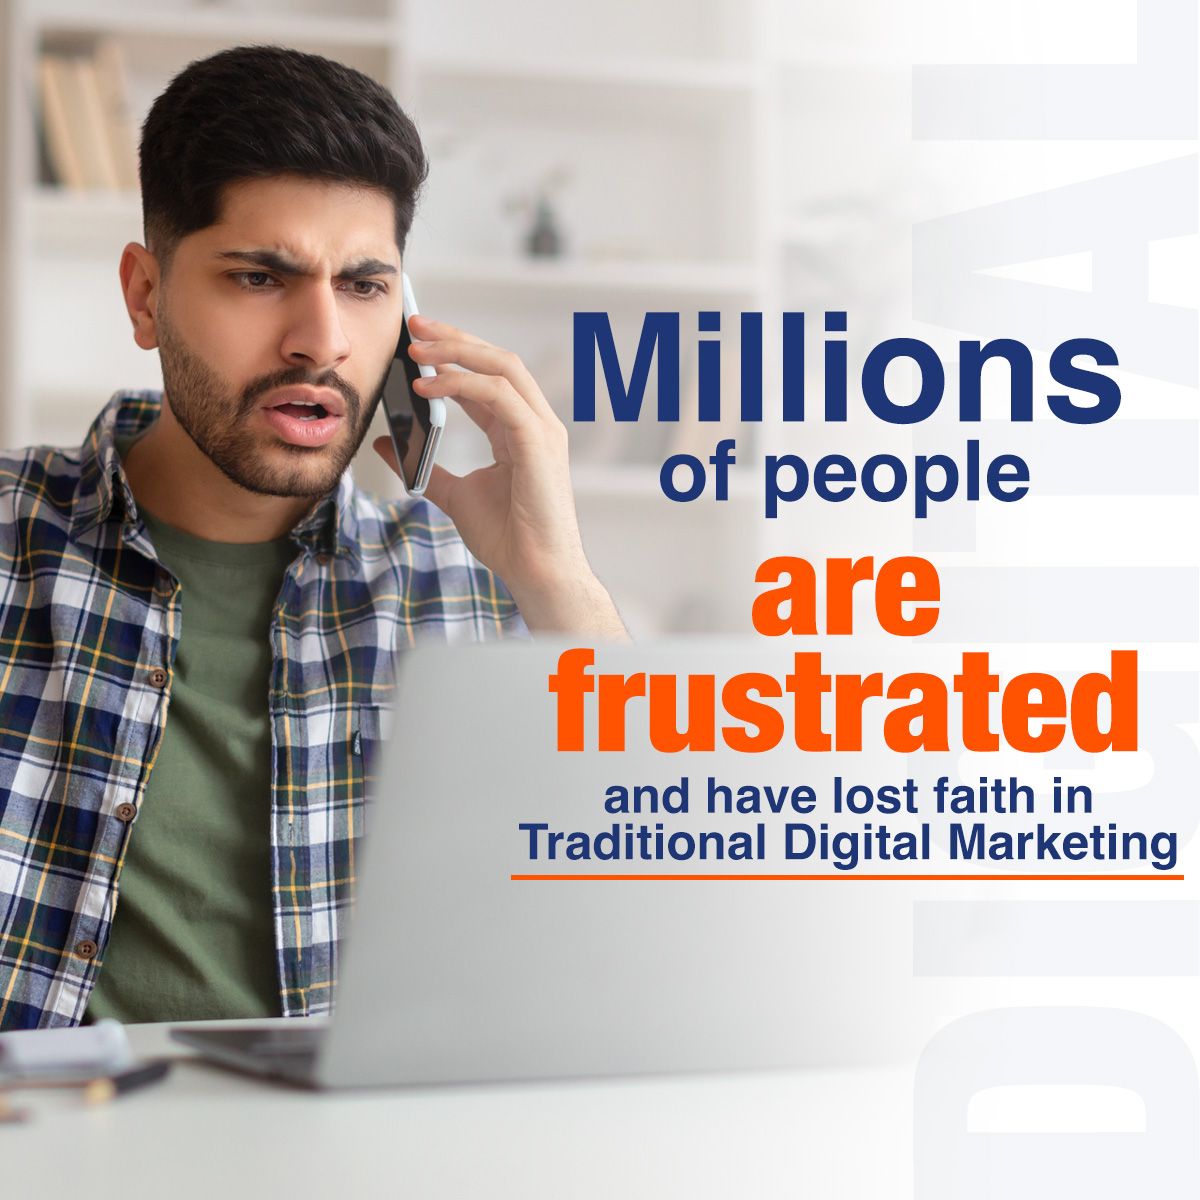 Millions of people are frustrated and have lost faith in Traditional Digital Marketing.